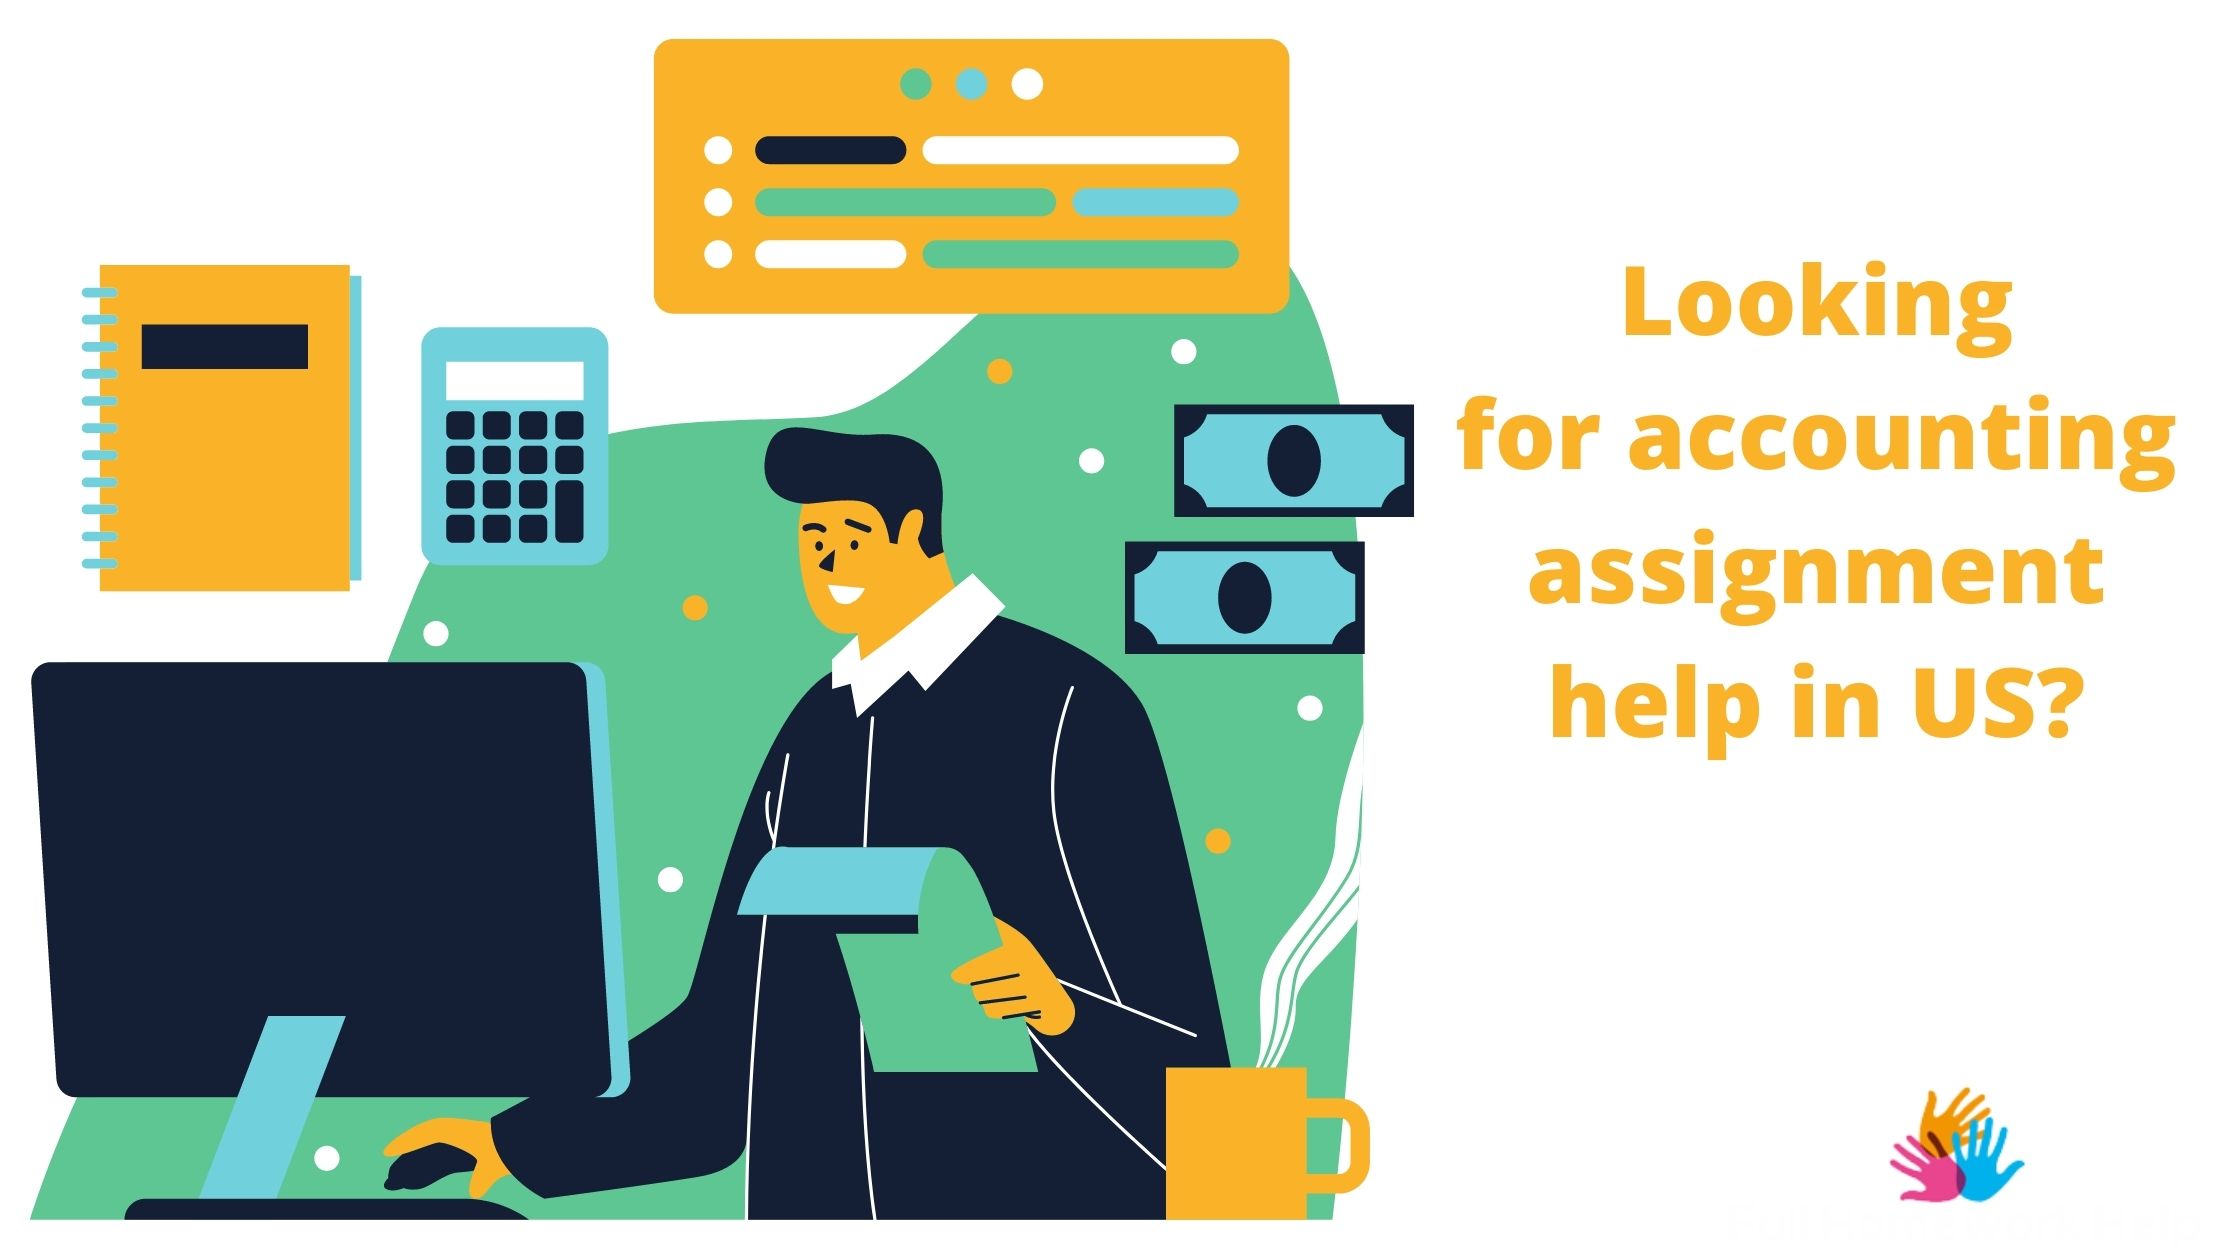 Looking for accounting assignment help in US